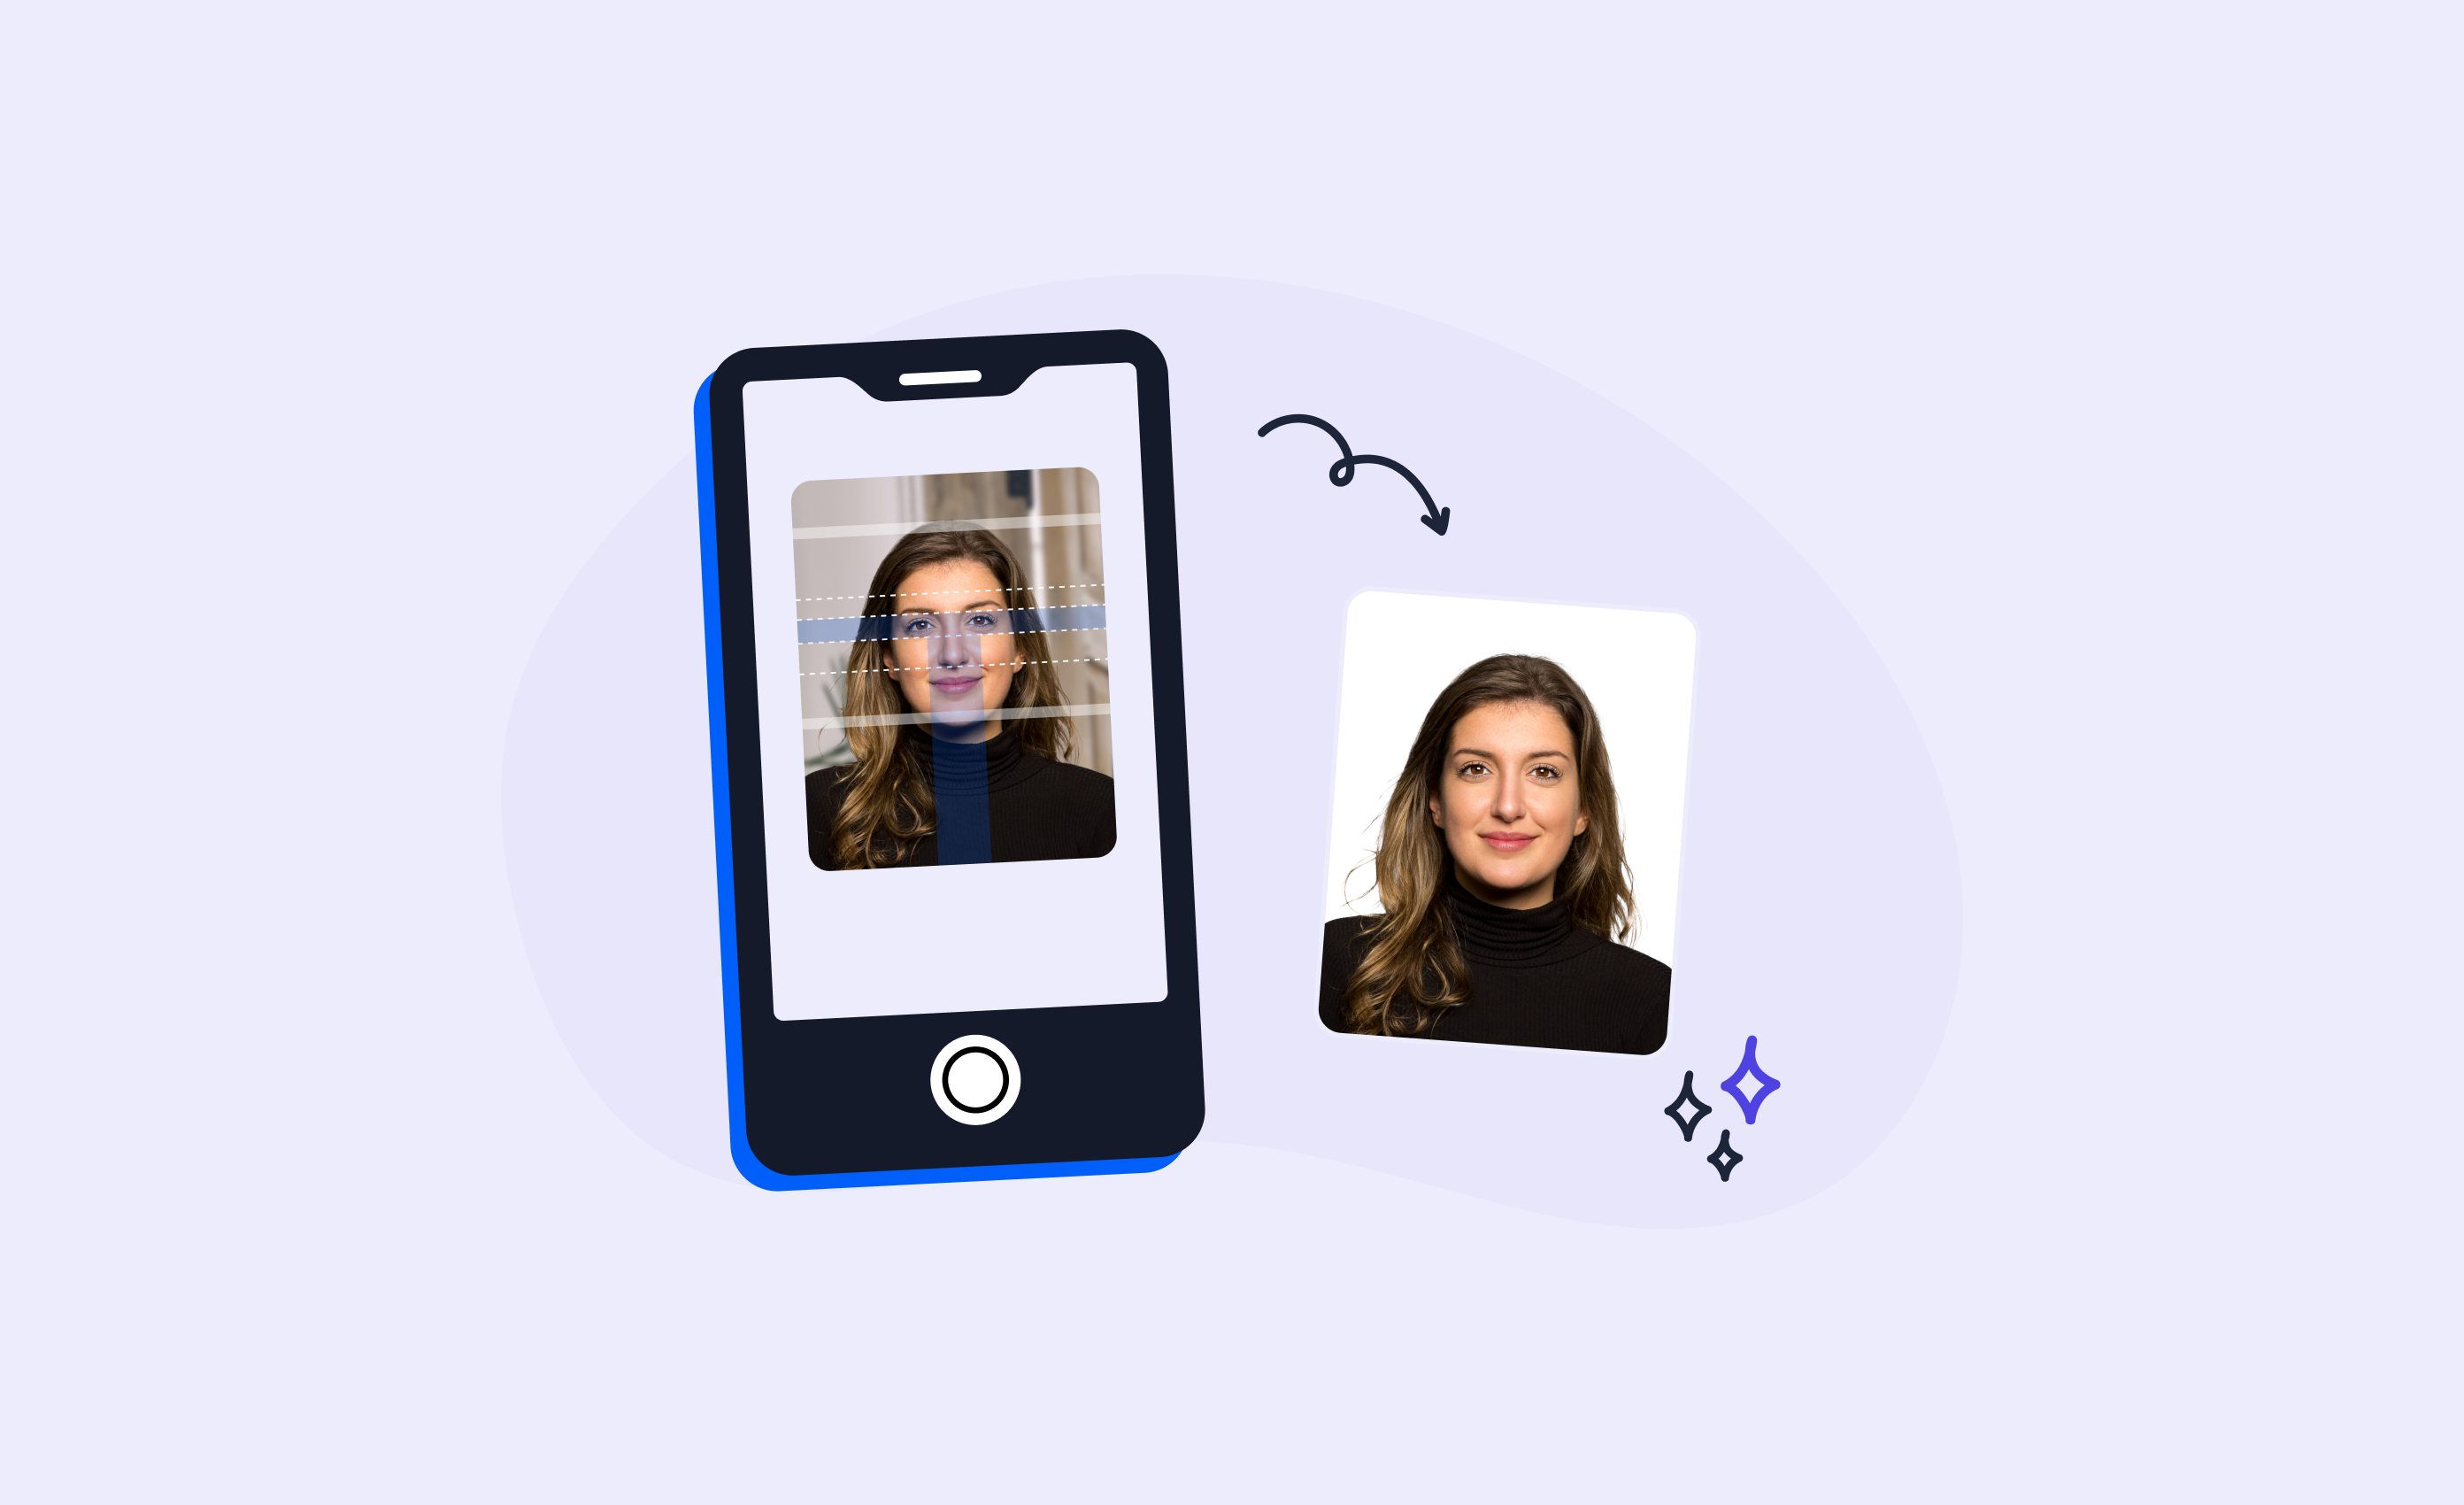 A picture showing a passport-sized photo created on a smartphone with an app.